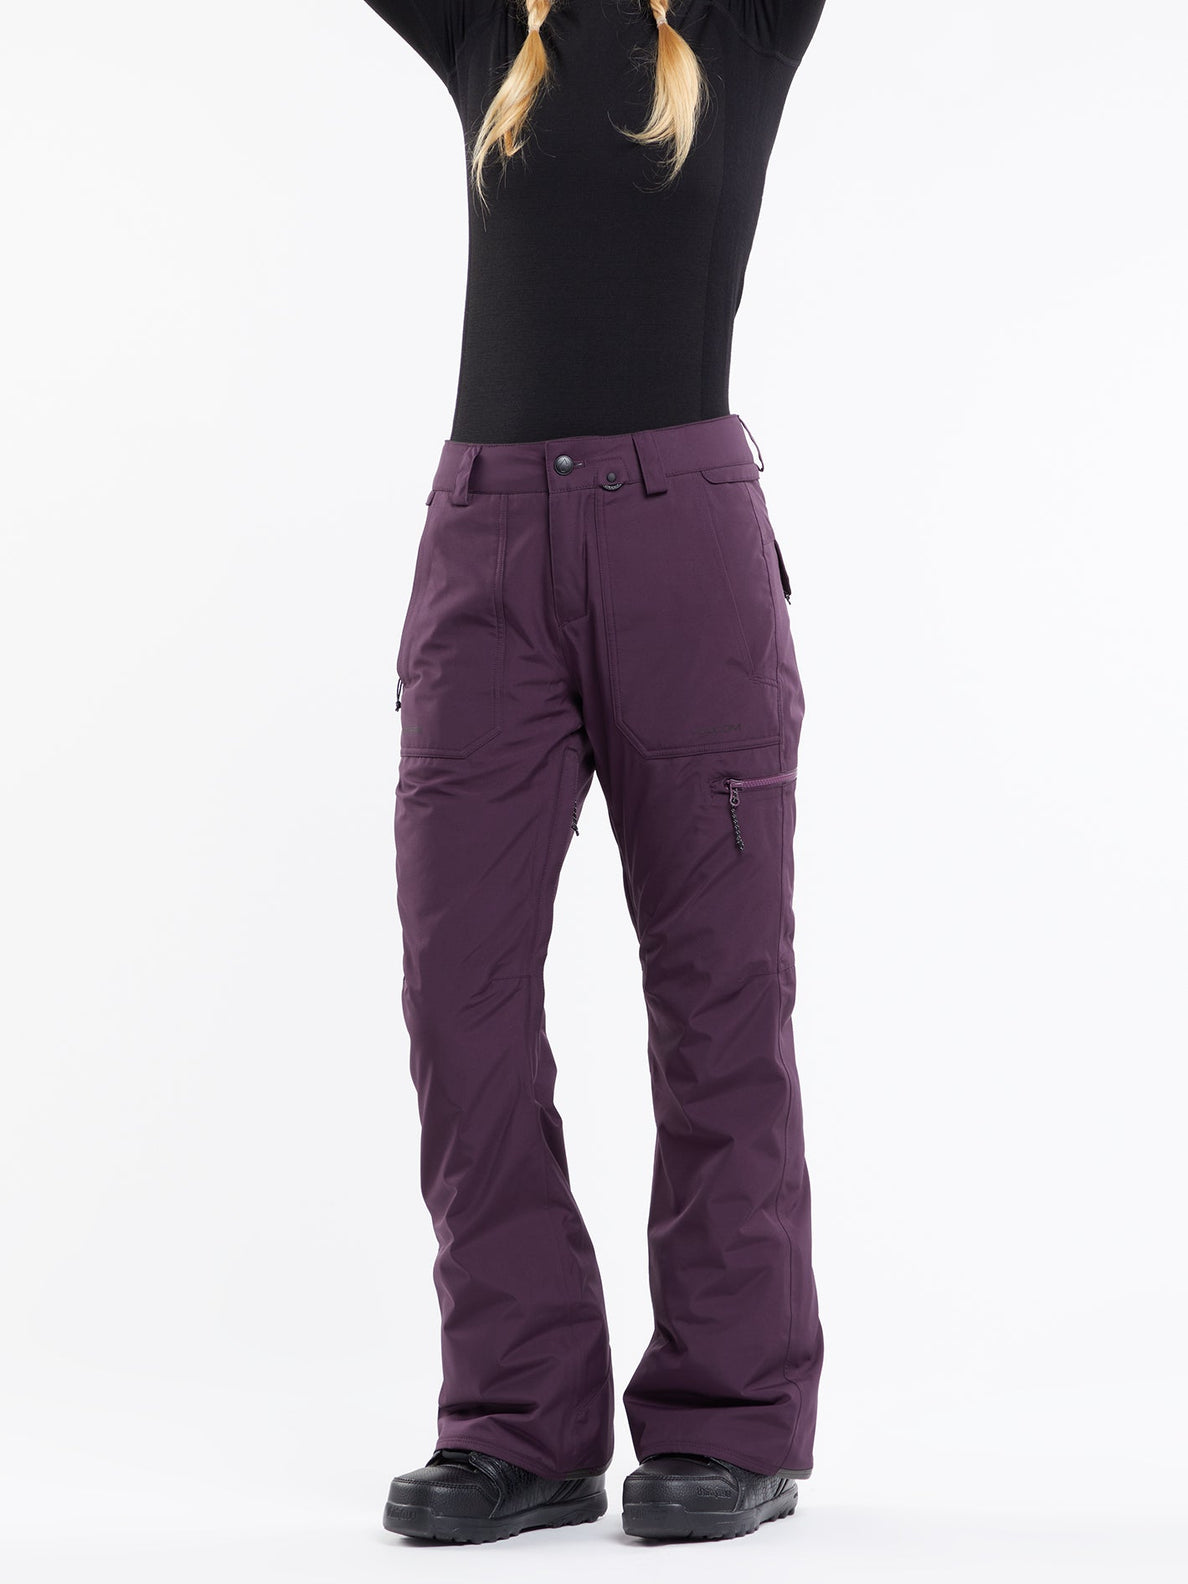 Knox Insulated Gore-Tex Trousers - BLACKBERRY (H1252400_BRY) [42]